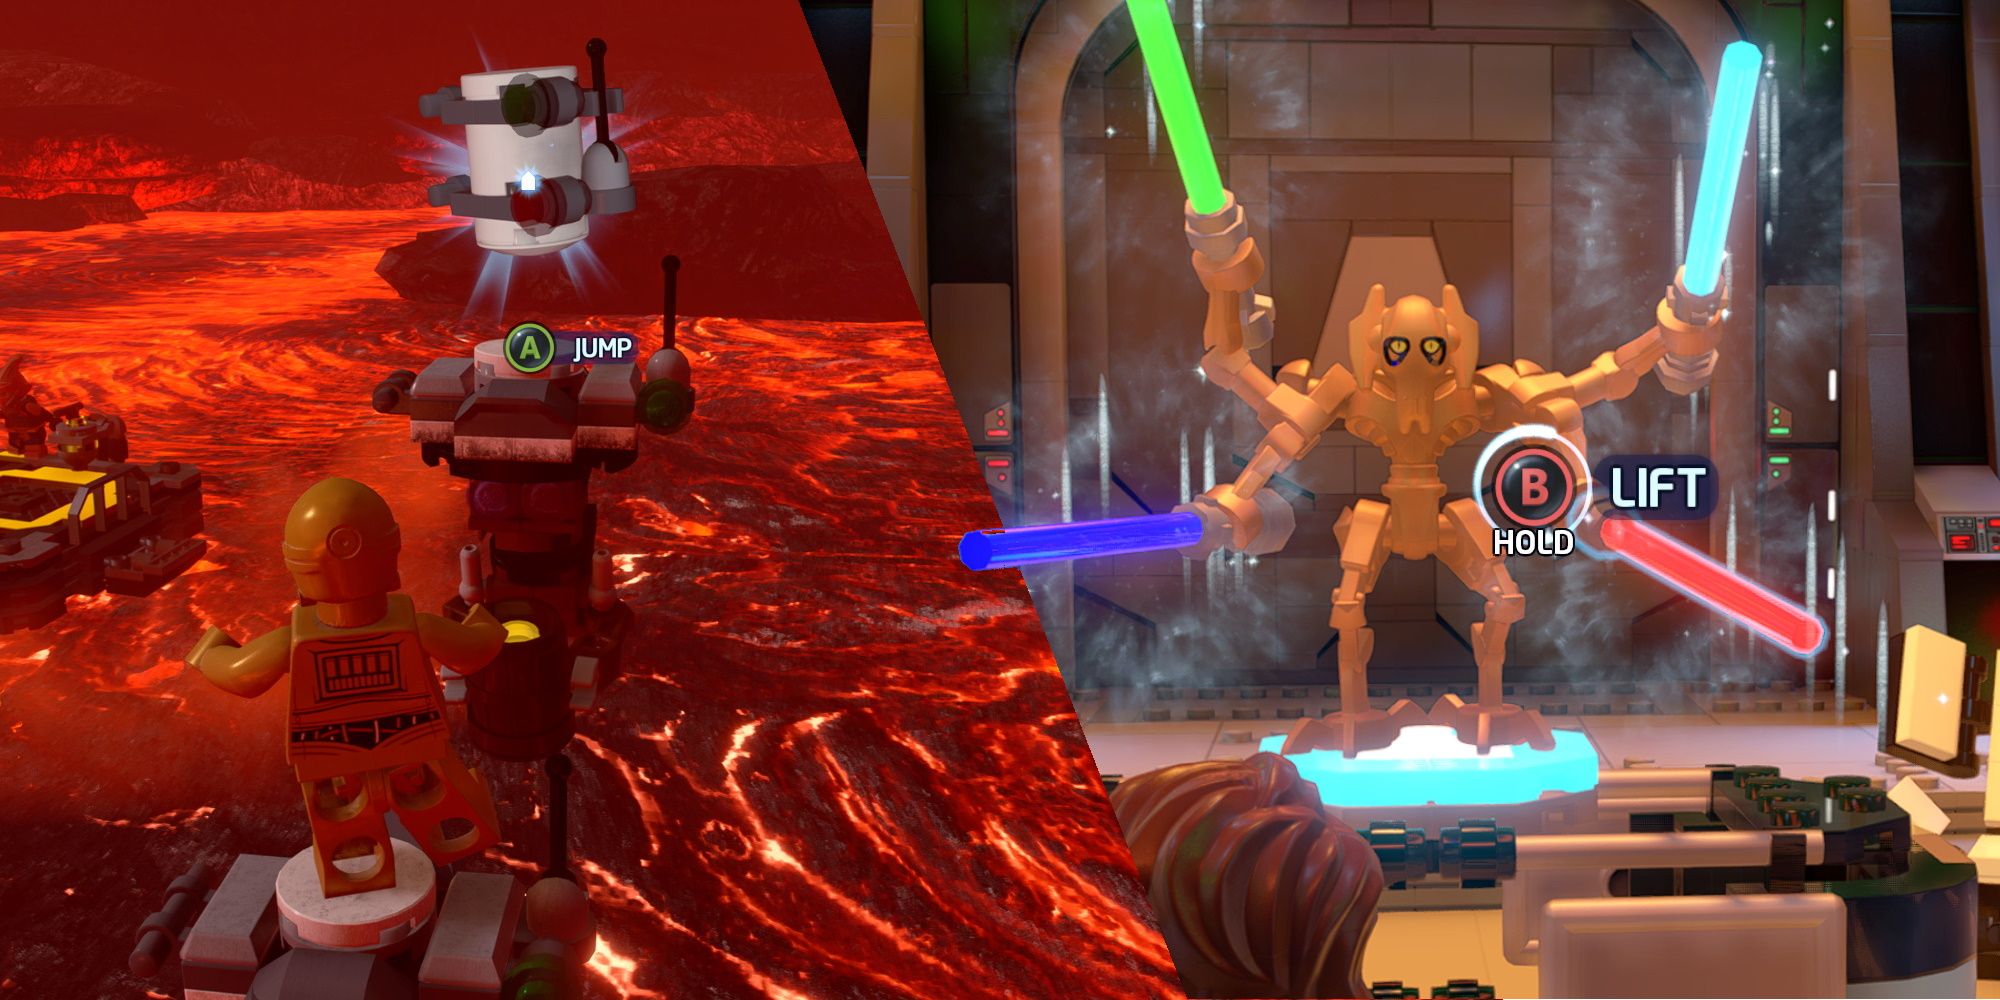 Split image showing the Grievous Statue and the Minikit obtained by crossing the lava